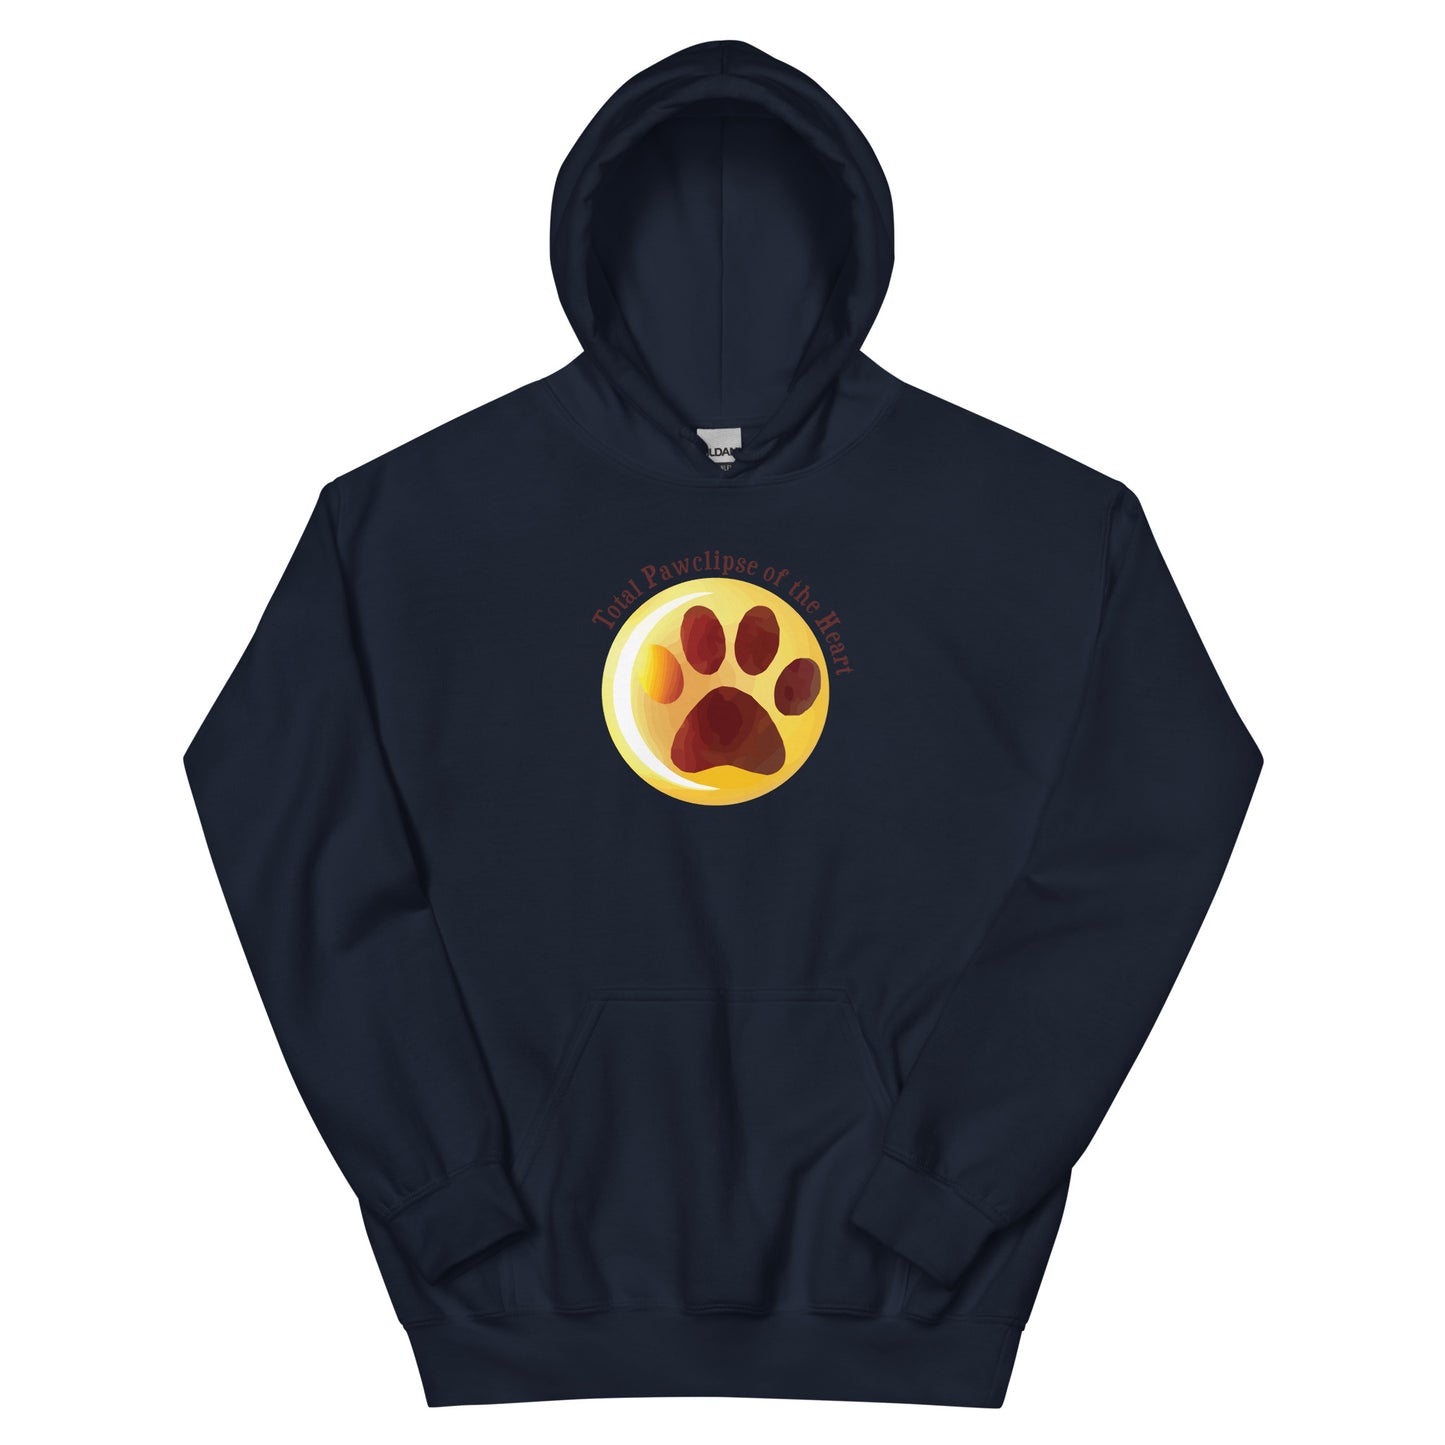 Total Pawclipse Of The Heart Hoodie